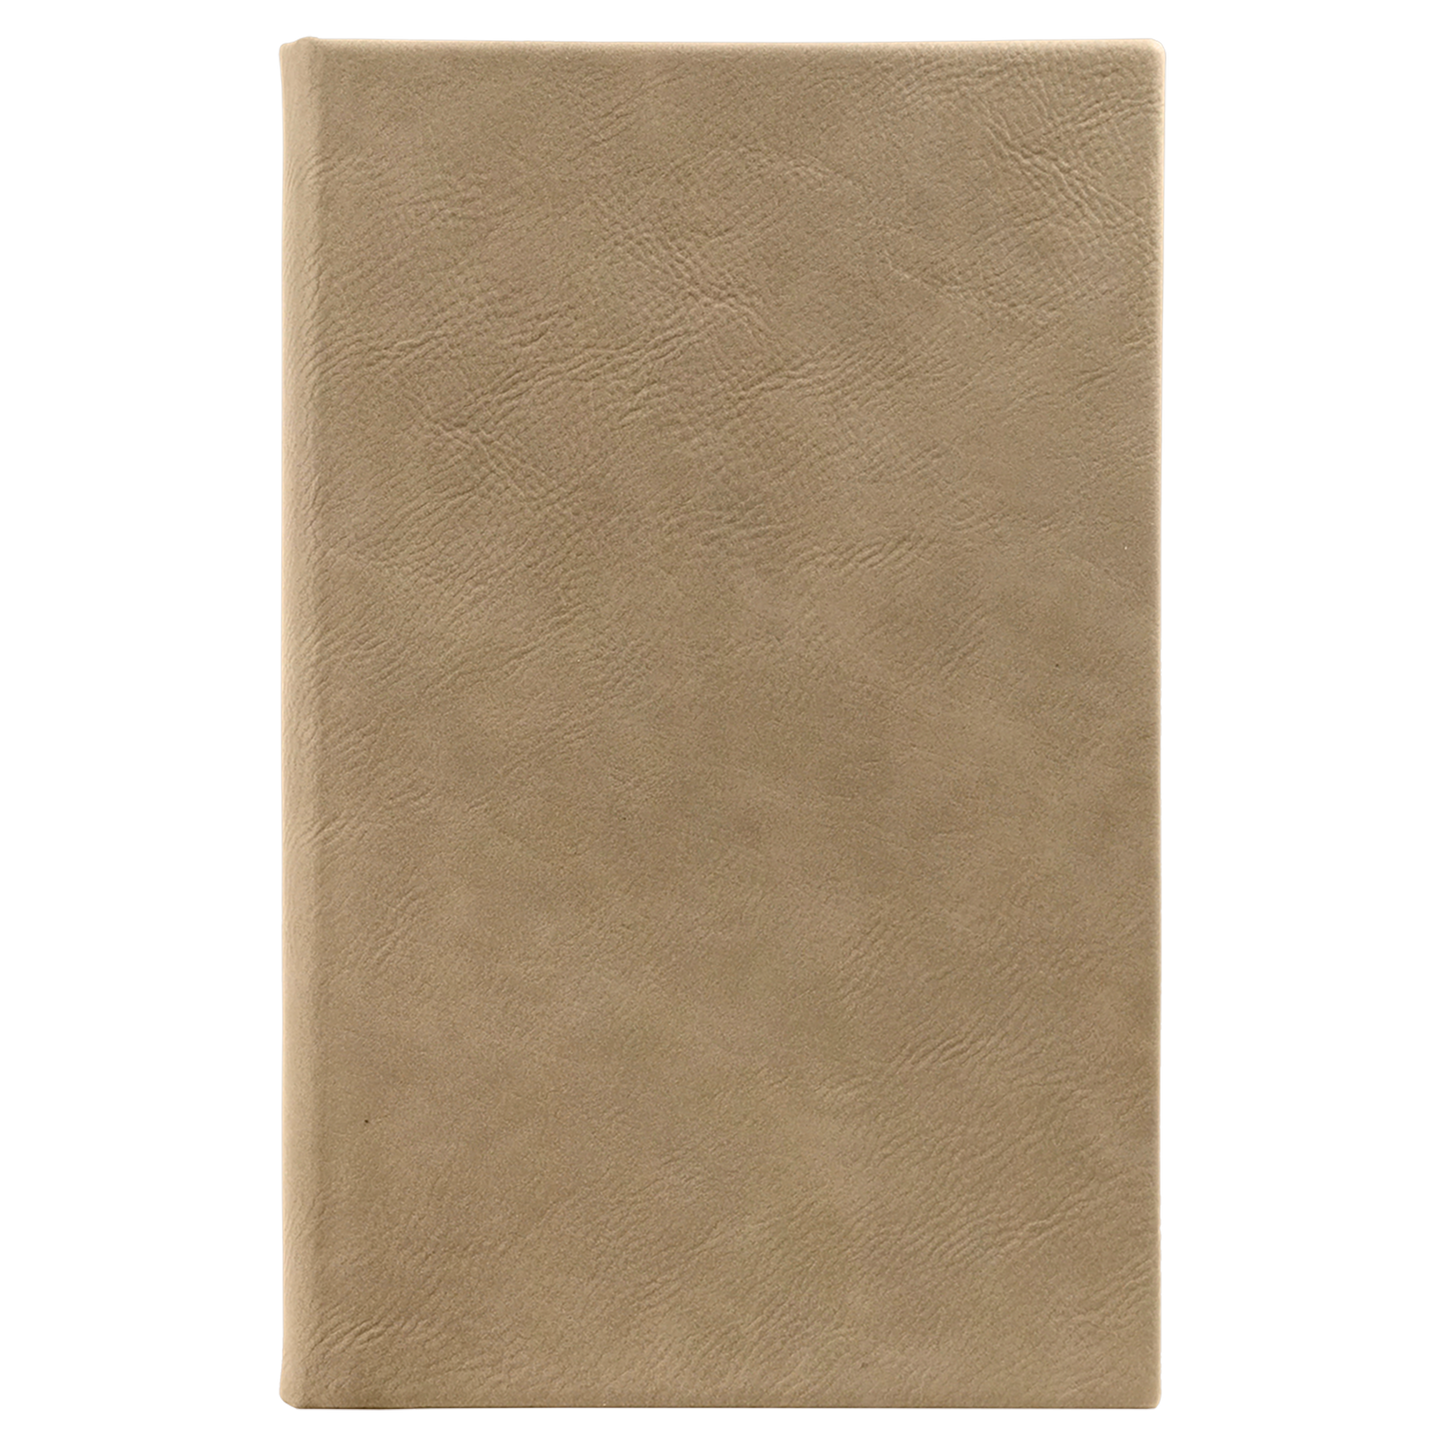 Sketch Book Journal 5 1/4" x 8 1/4" Leatherette - UNLINED Paper